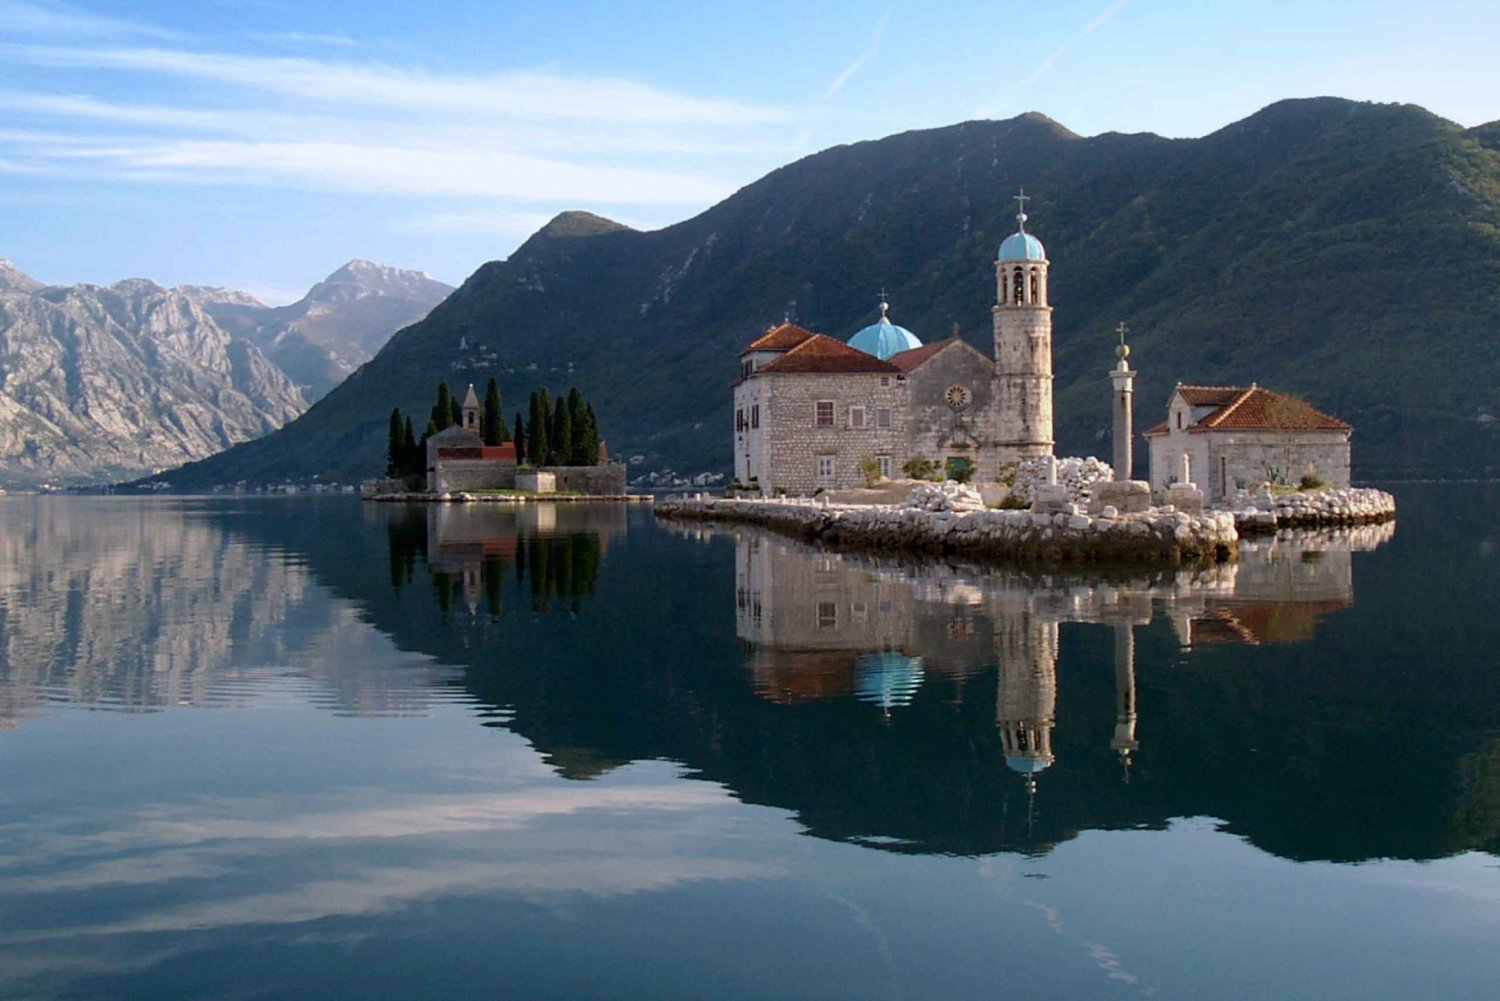 Montenegro Coast: Full-Day Trip from Dubrovnik